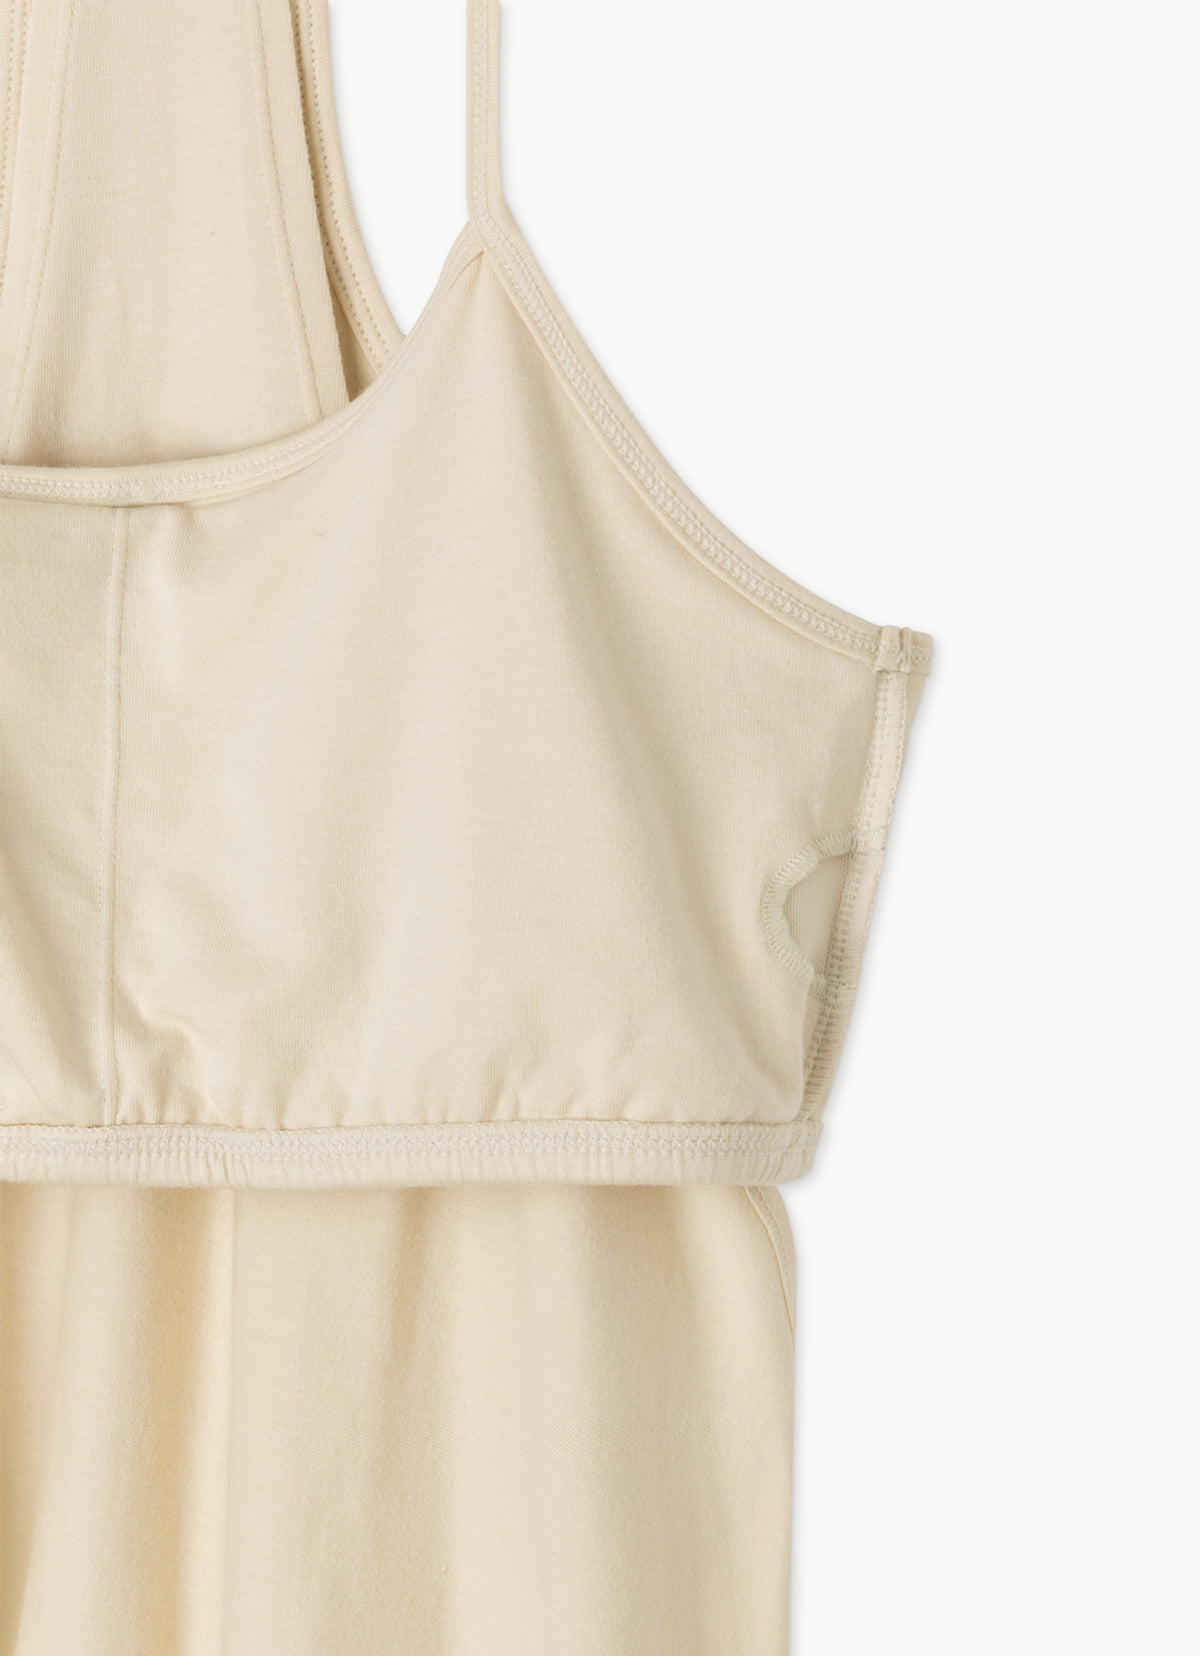 Layered halter tank top_Oyster White